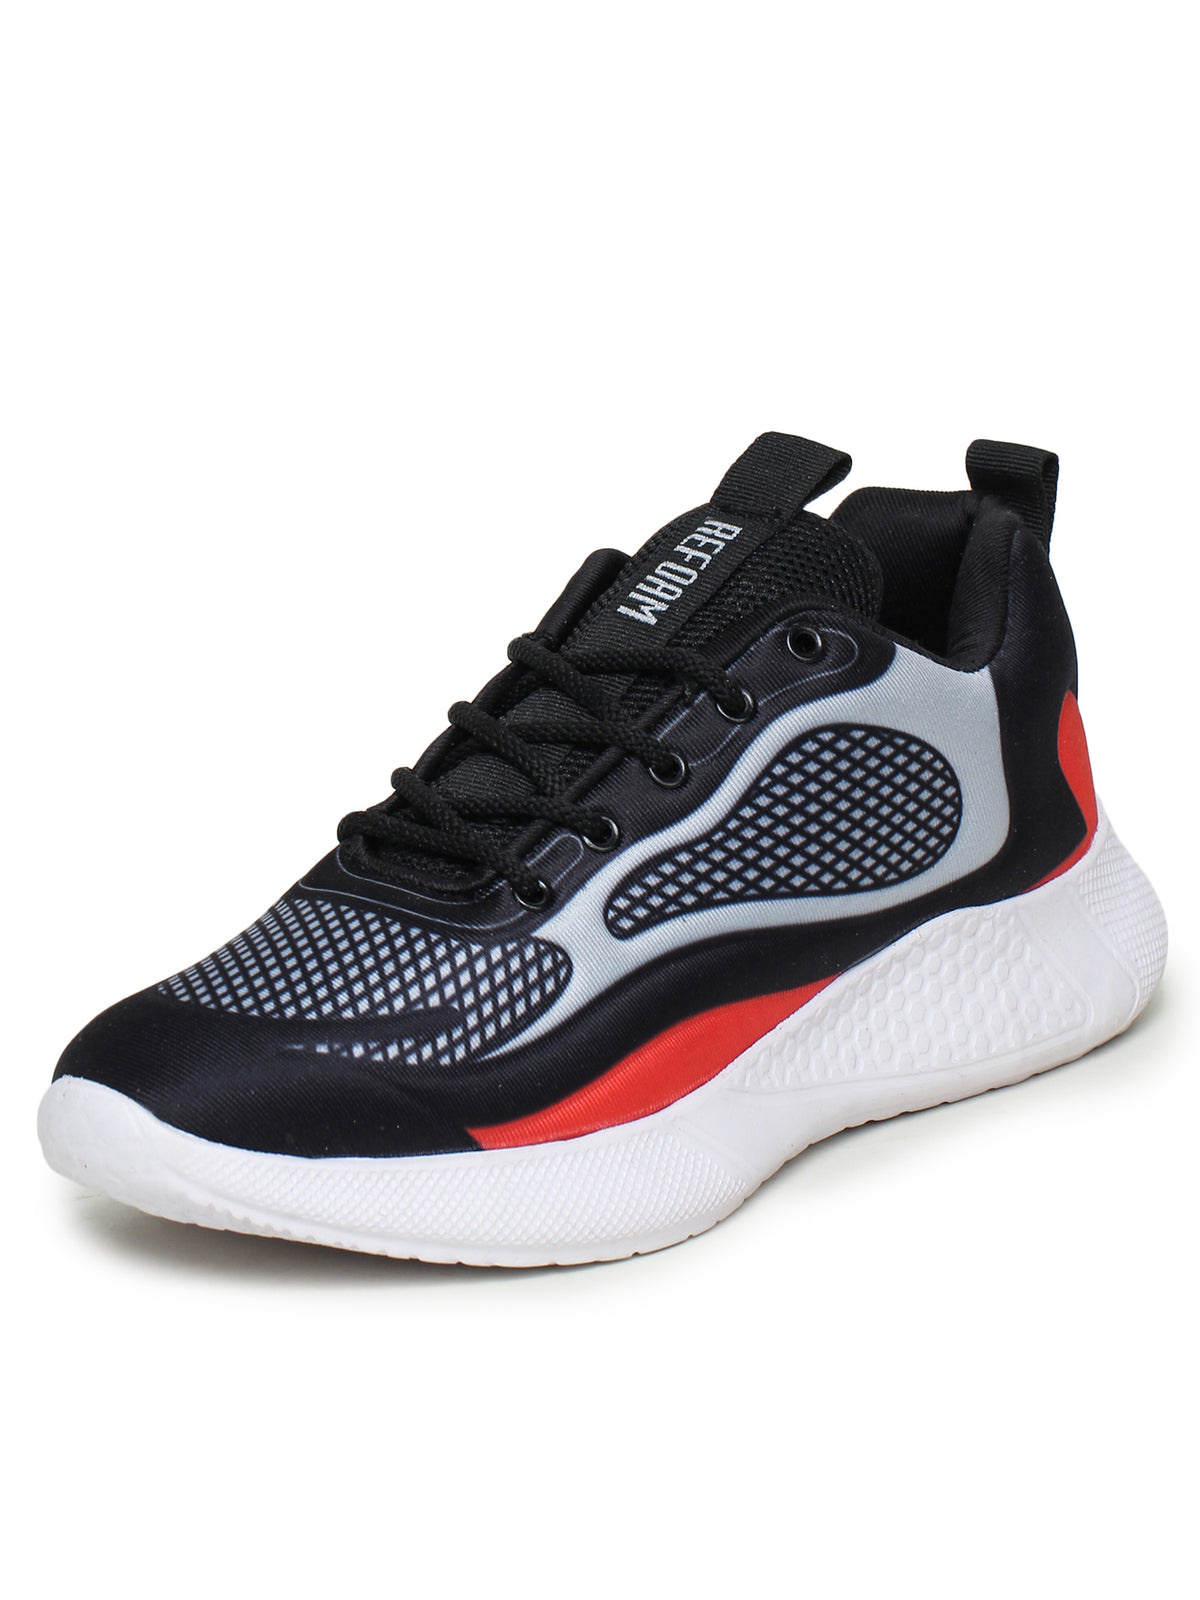 Red Solid Fabric Lace Up Running Sport Shoes For Men